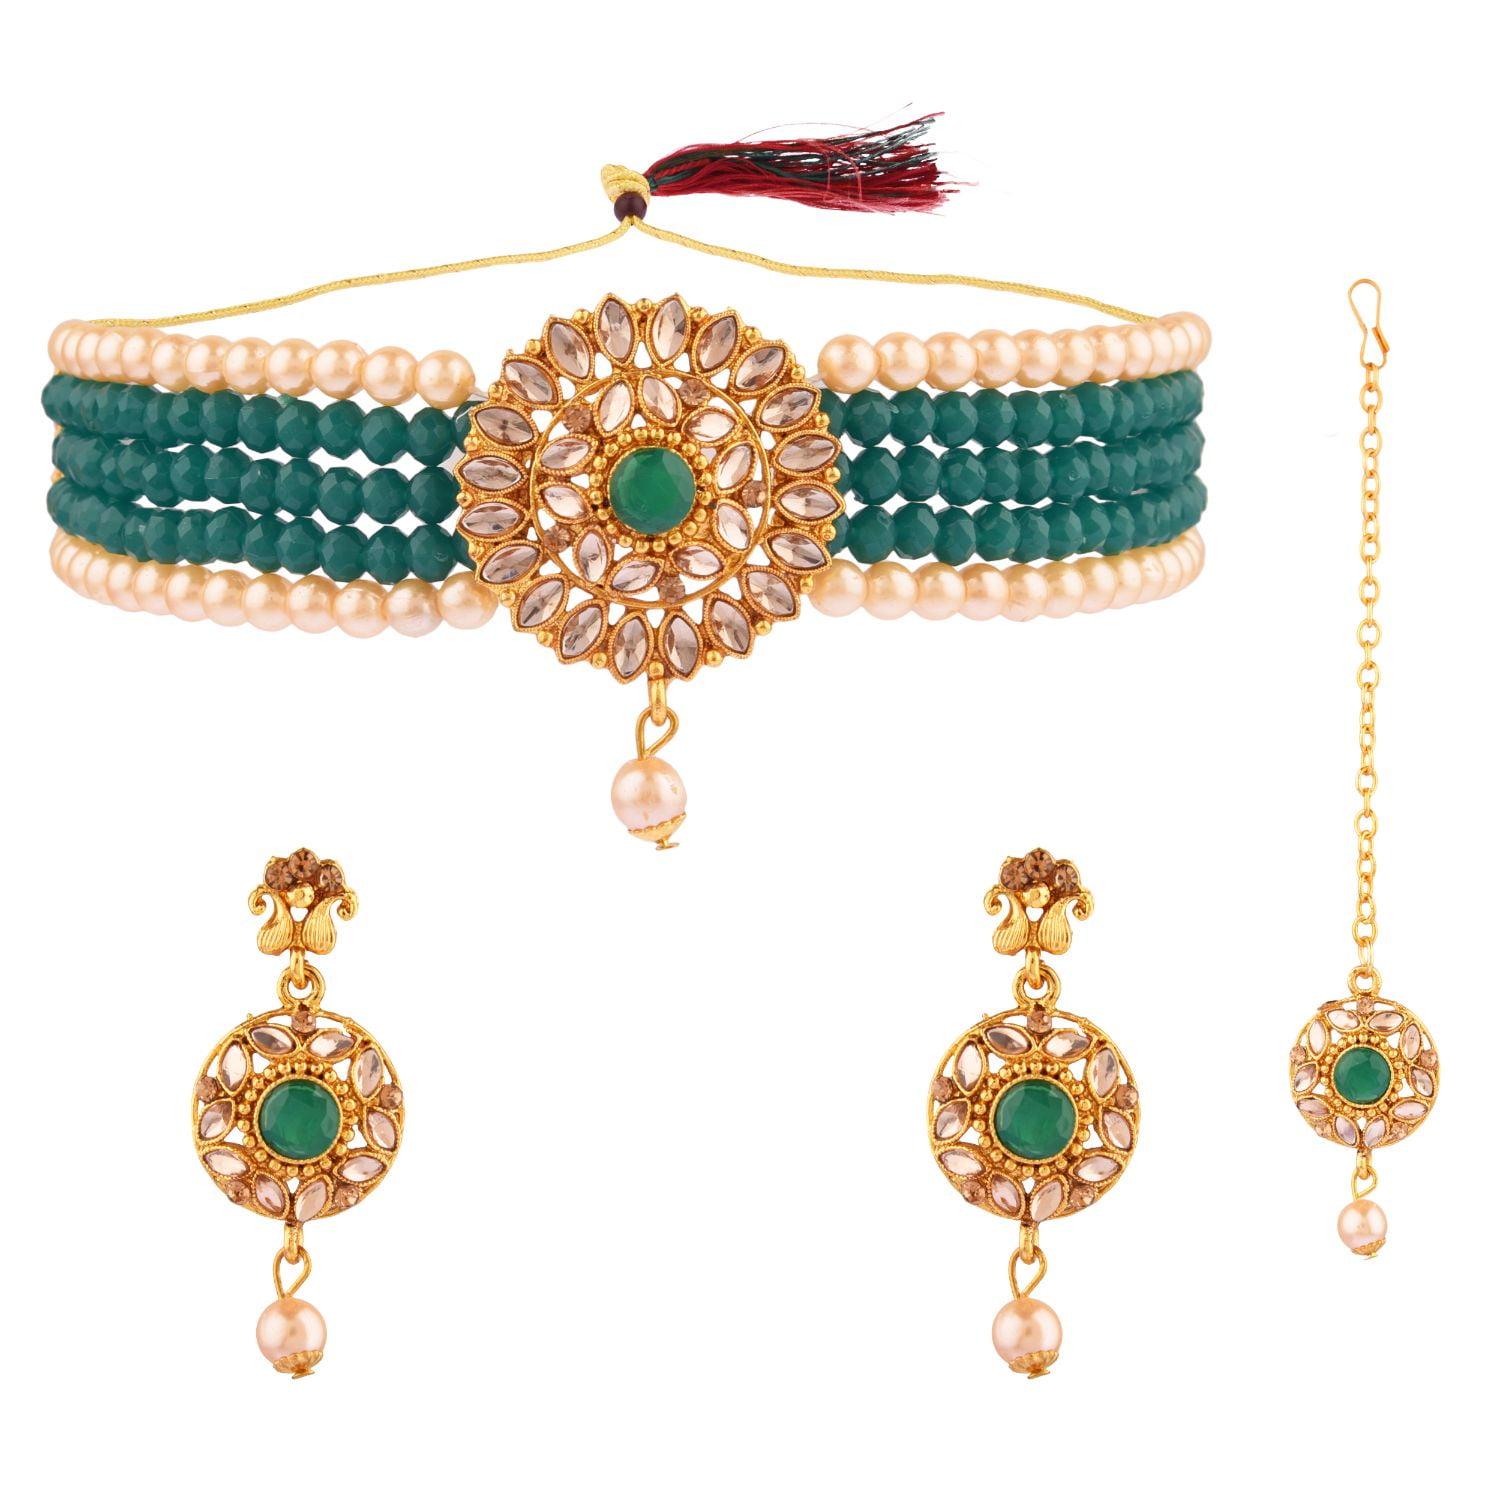 Traditional south indian bridal jewellery set with mango motif